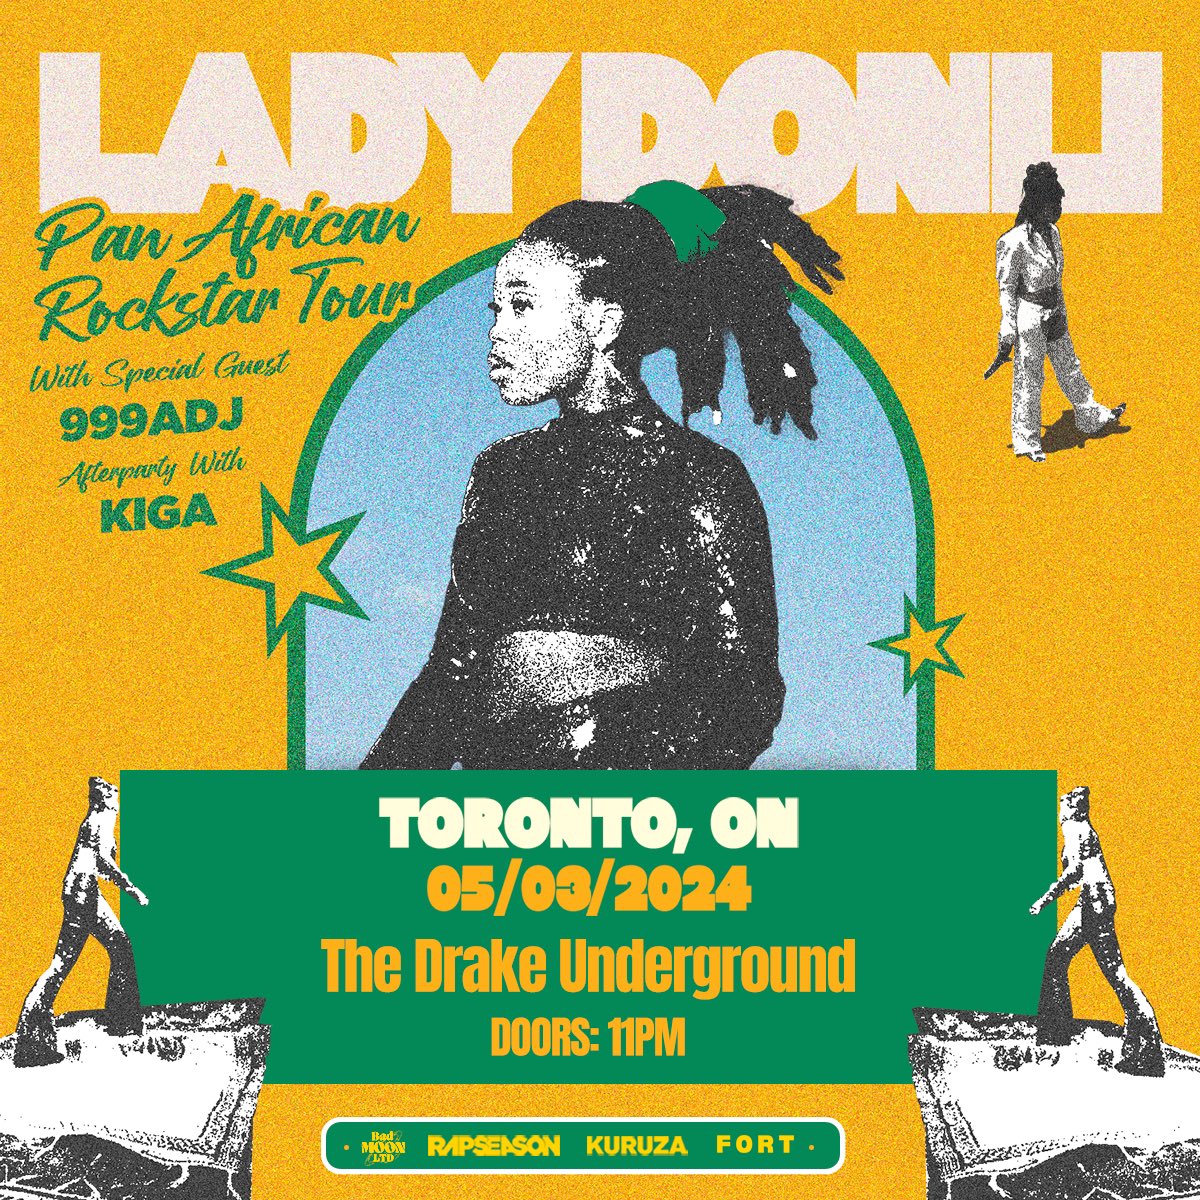 TONIGHT! @LadyDonli takes The Drake Underground with special guest @999_adj and an after party spun by @kigaland of @kuruzaworld. 

💫💫💫

SET TIMES
11PM - Doors/999ADJ
12AM - Lady Donli
1AM - Kiga

🎫Limited tickets left: bit.ly/RSxLADYDONLI